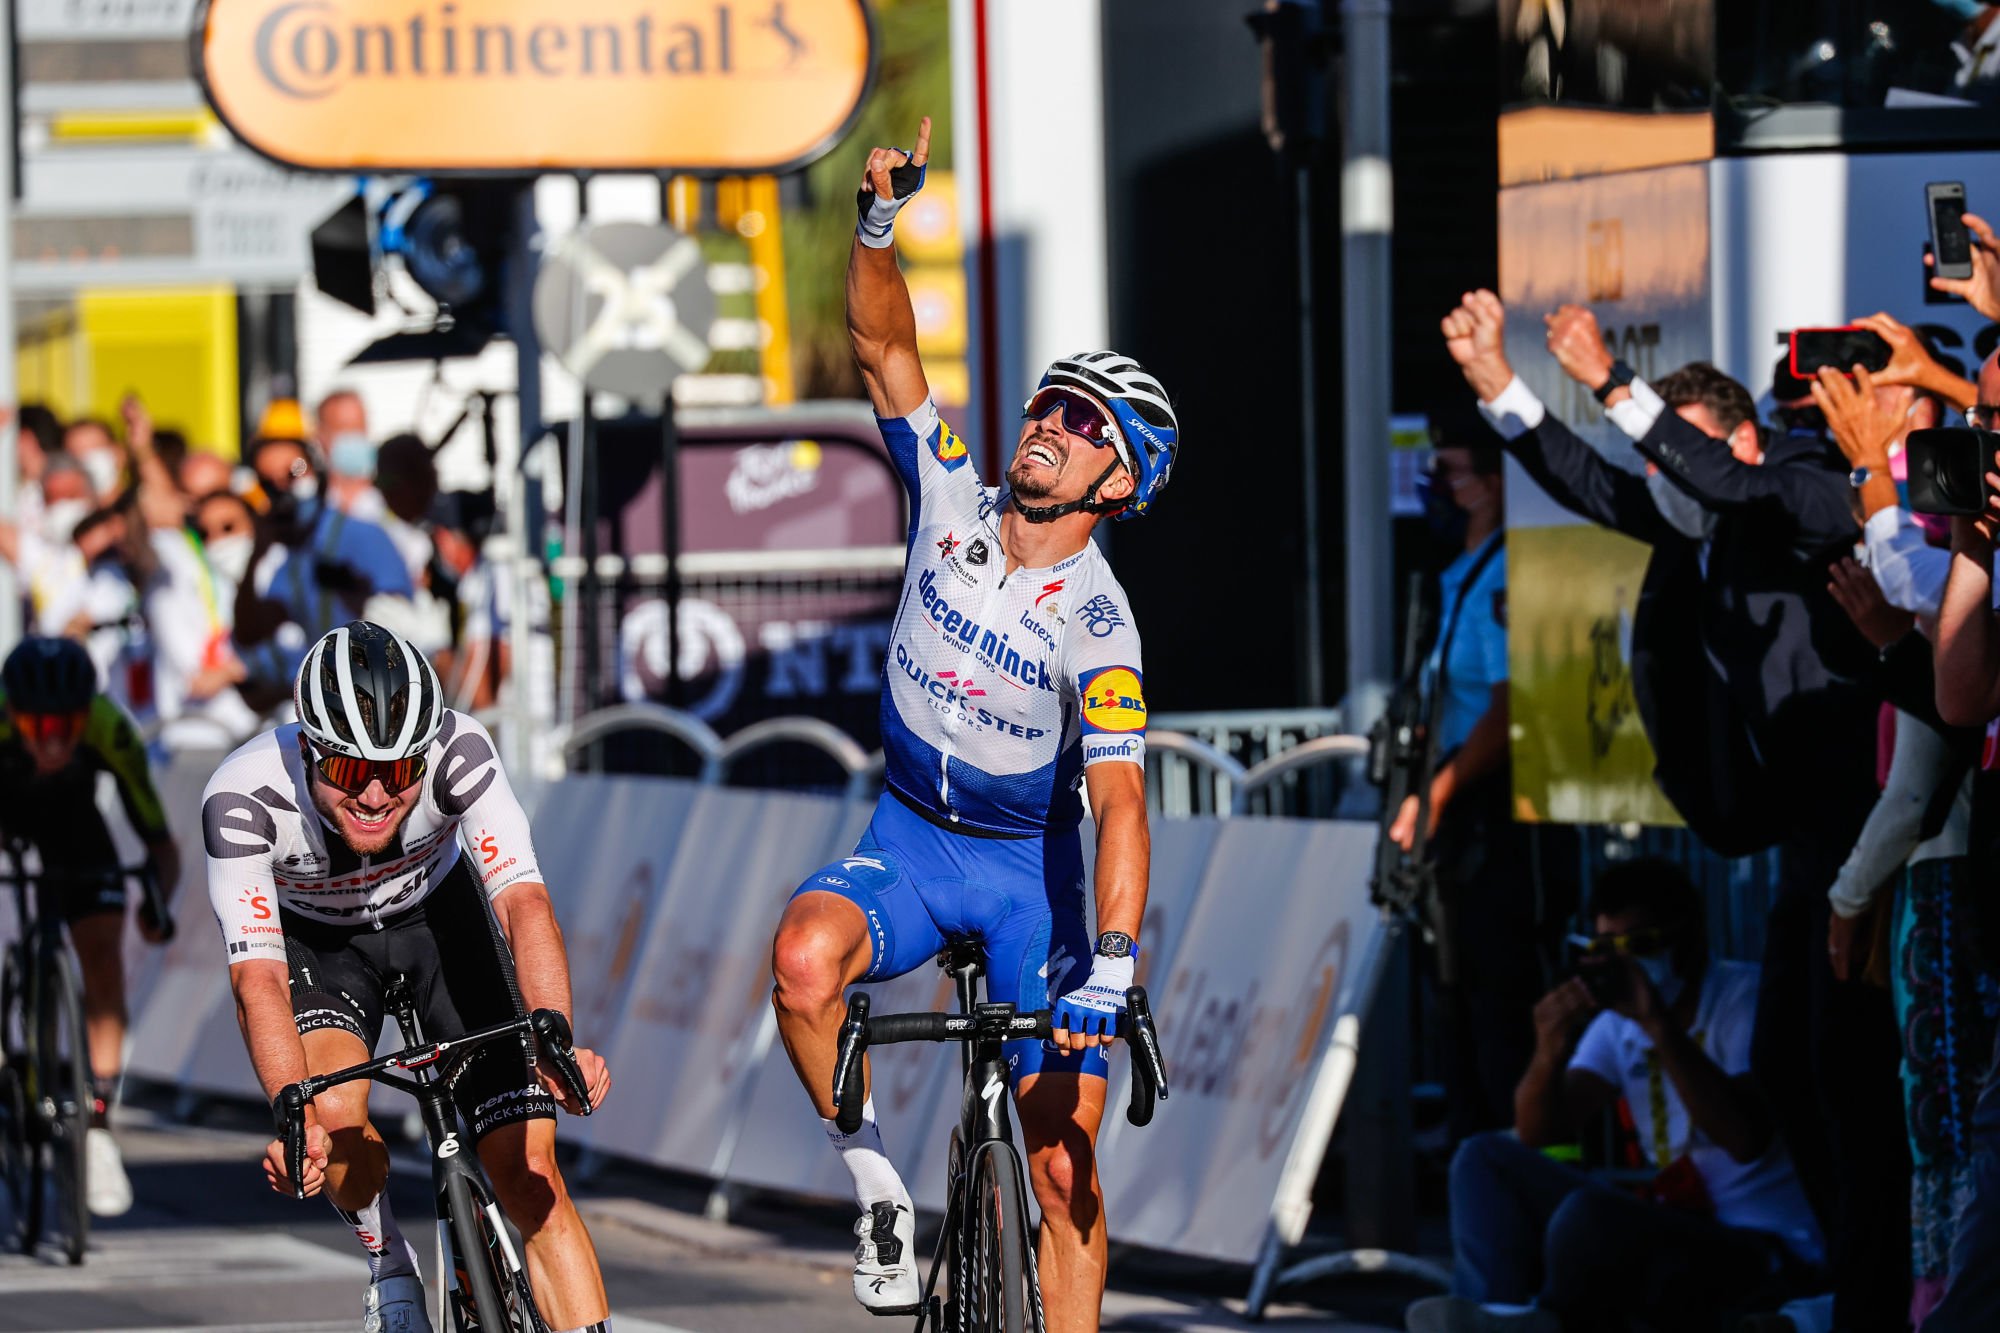 Julian Alaphilippe - Deceuninck - Quick-Step
Photo by Icon Sport